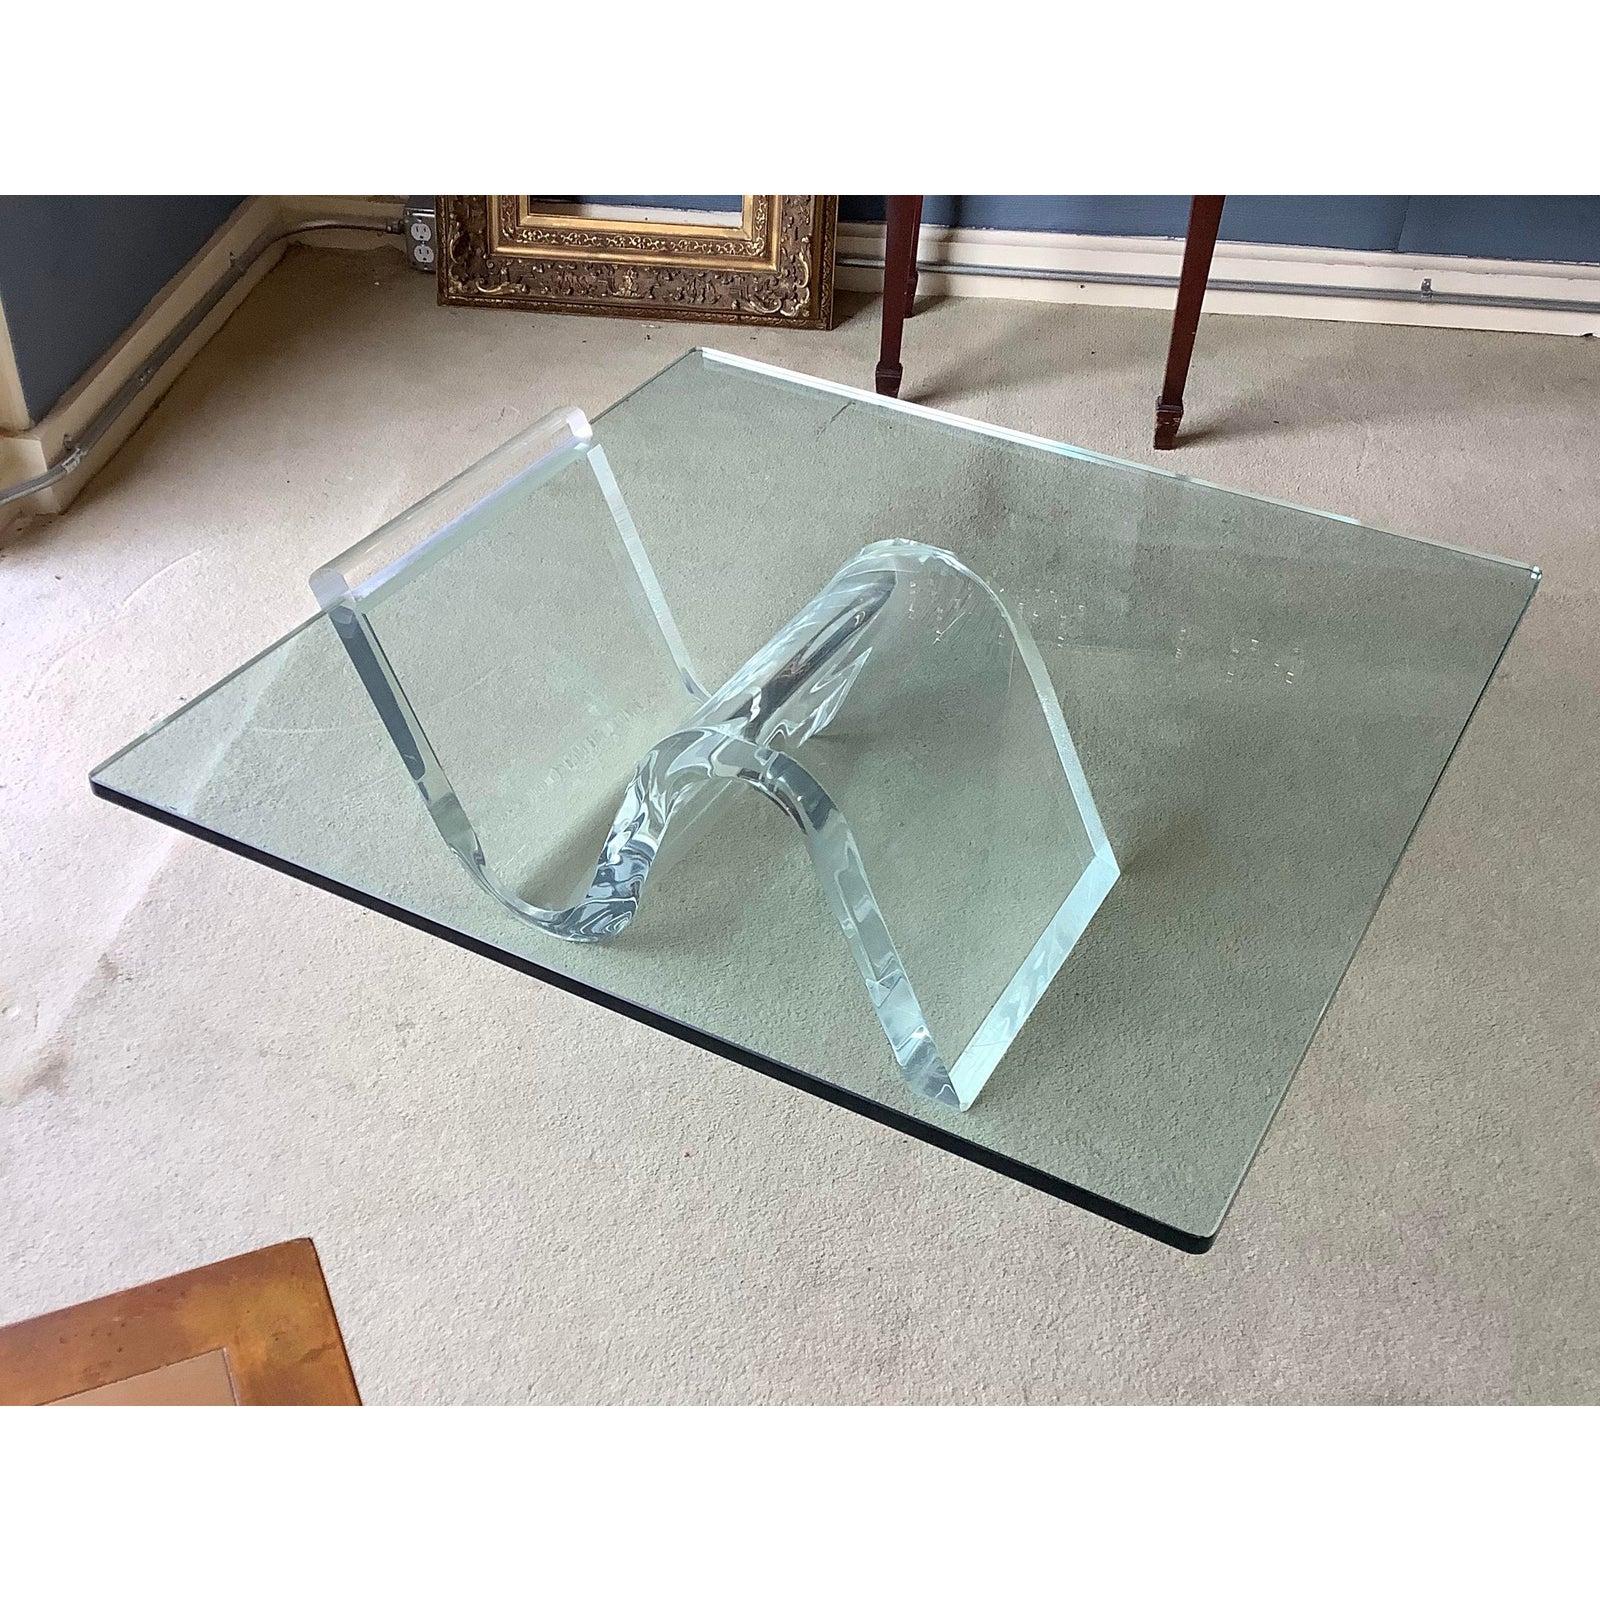 Very unusual Karl Springer inspired acrylic cantilevered cocktail table with a new 3/4 inch glass top.
Our midcentury acrylic or Lucite cocktail table or coffee table is in very good condition with a very tiny chip on left end which when on a thick